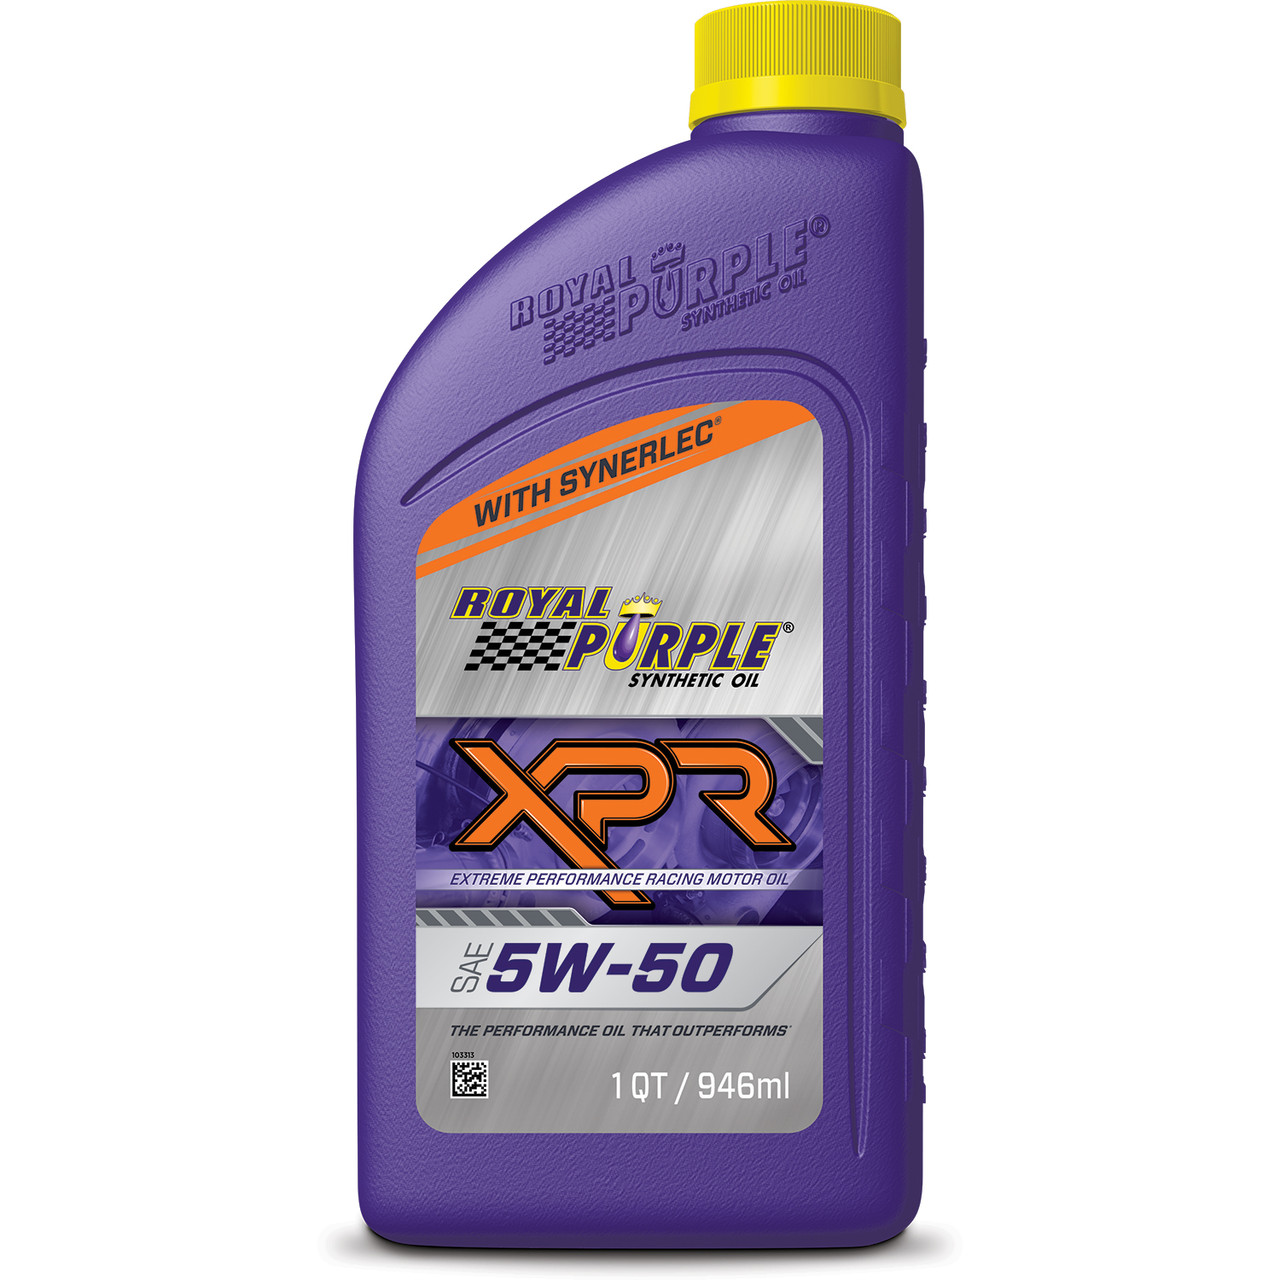 Royal Purple XPR 5W-50 Extreme Performance Racing Oil